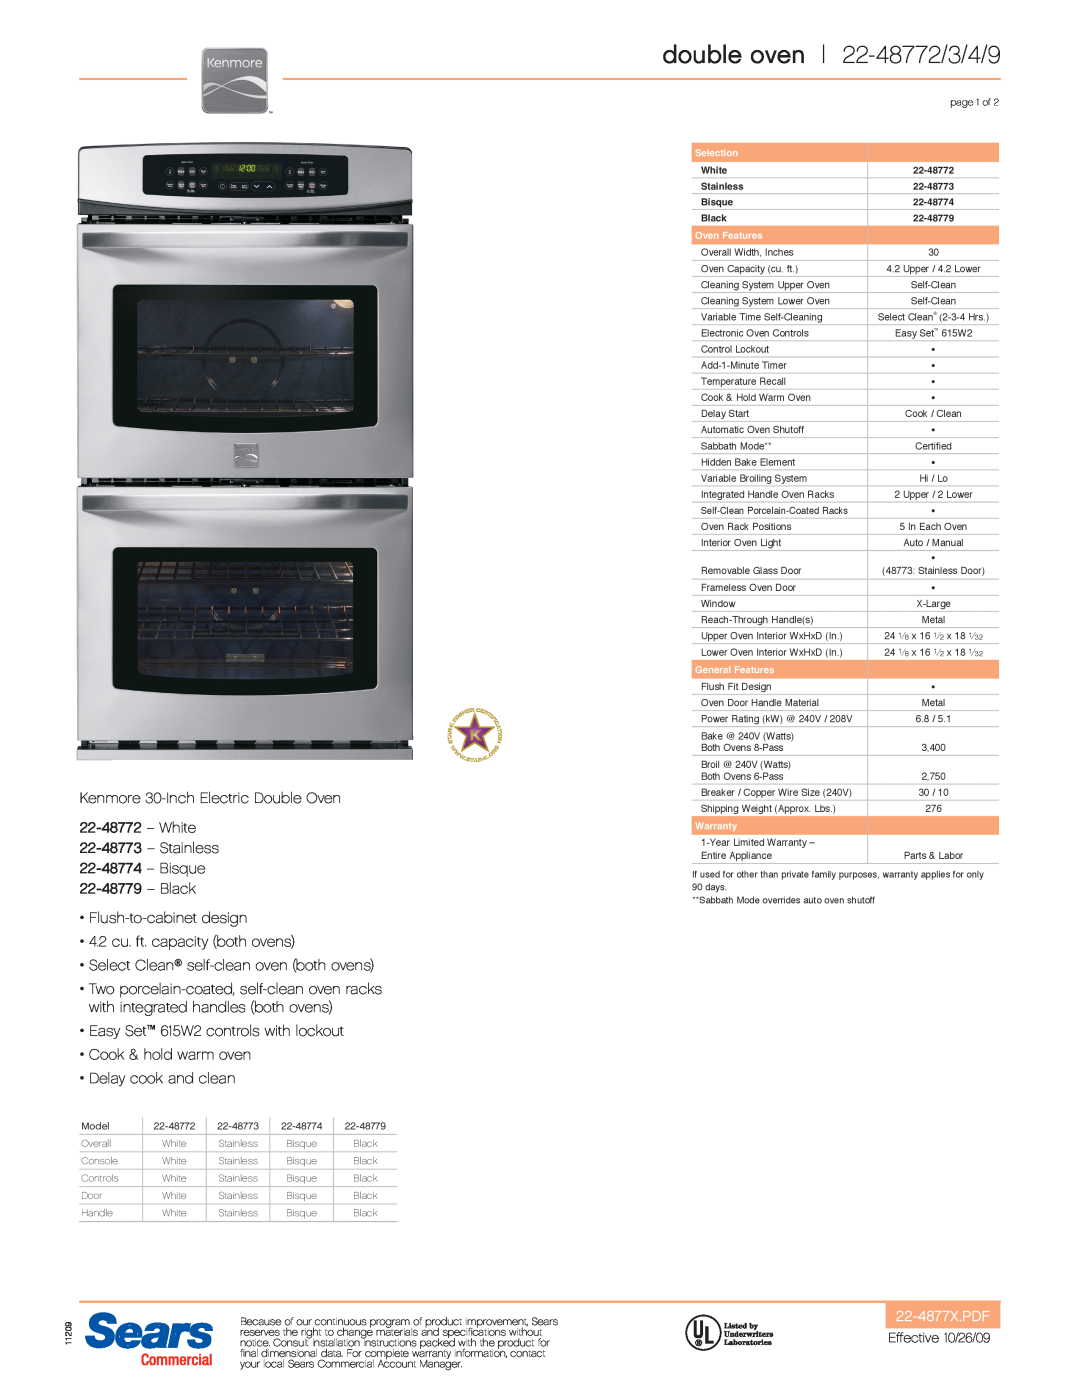 Kenmore 22-48832, 22-48839 double oven 22-48772/3/4/9, Kenmore 30-Inch Electric Double Oven 22-48772 - White, 22-4877X.PDF 